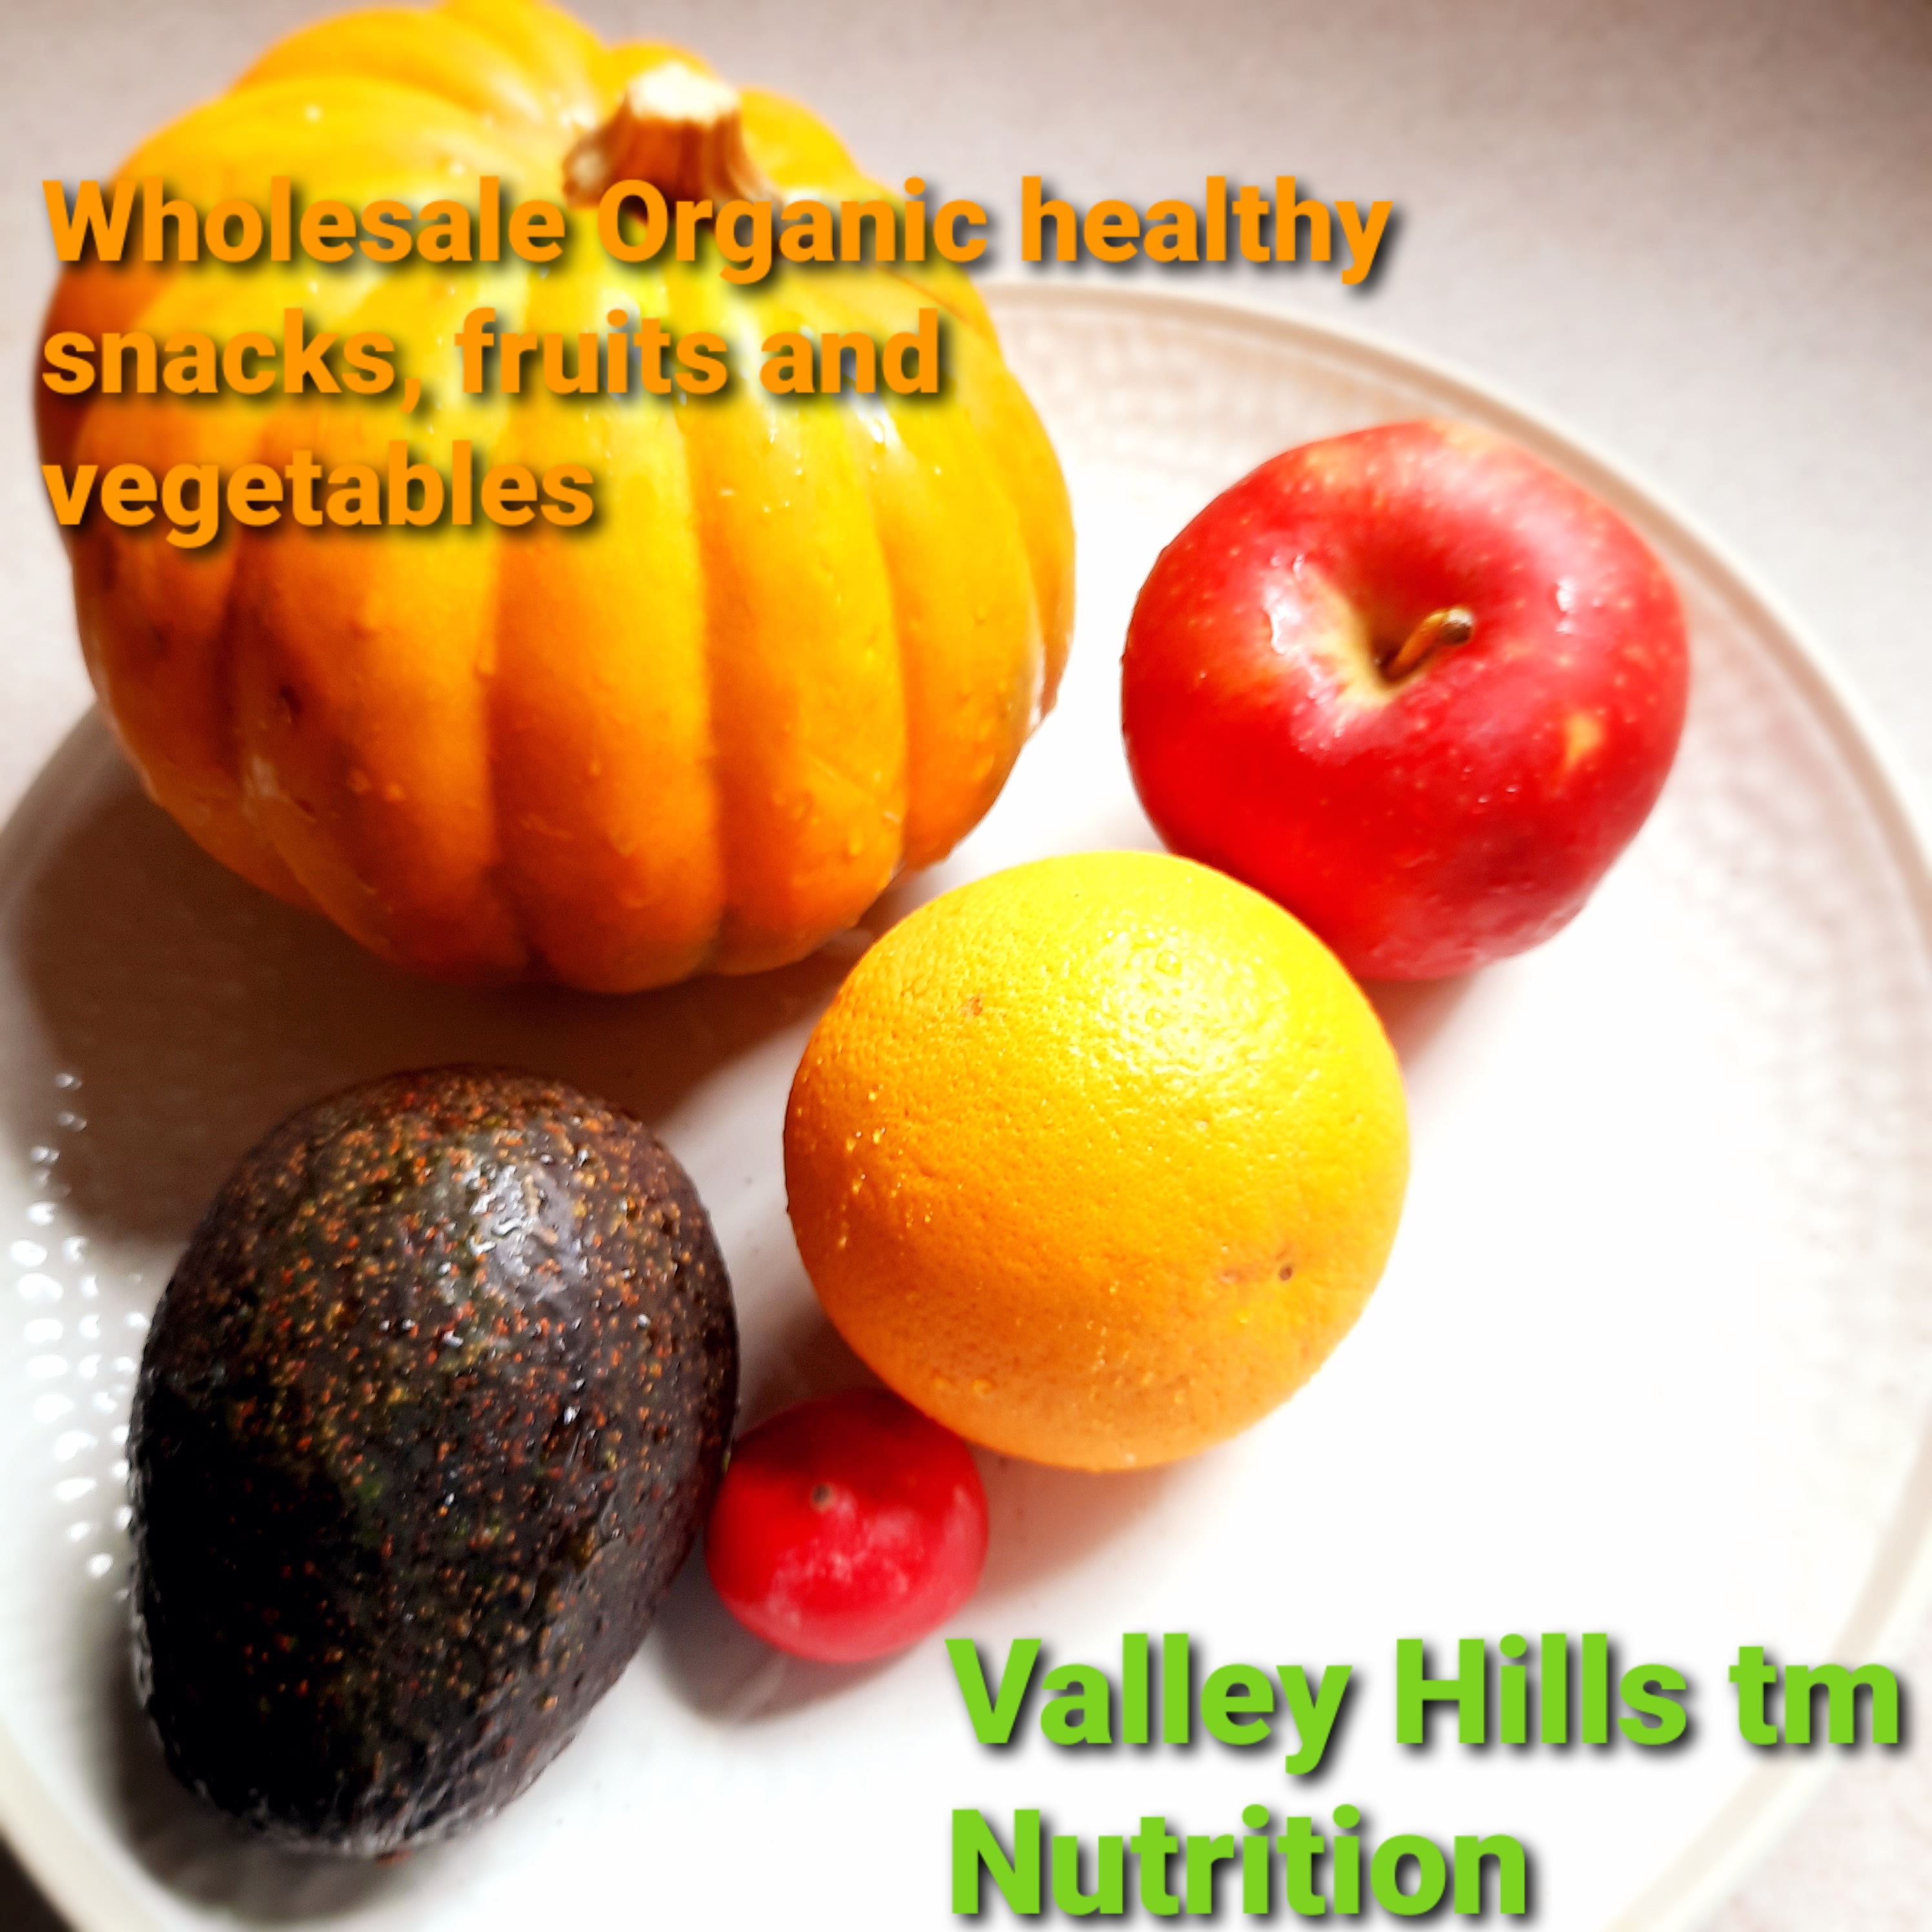 VALLEY HILLS tm NATURAL AND ORGANIC WHOLESALE FRUITS AND VEGETABLES AND HEALTHY SNACKS AND NUTRITION.